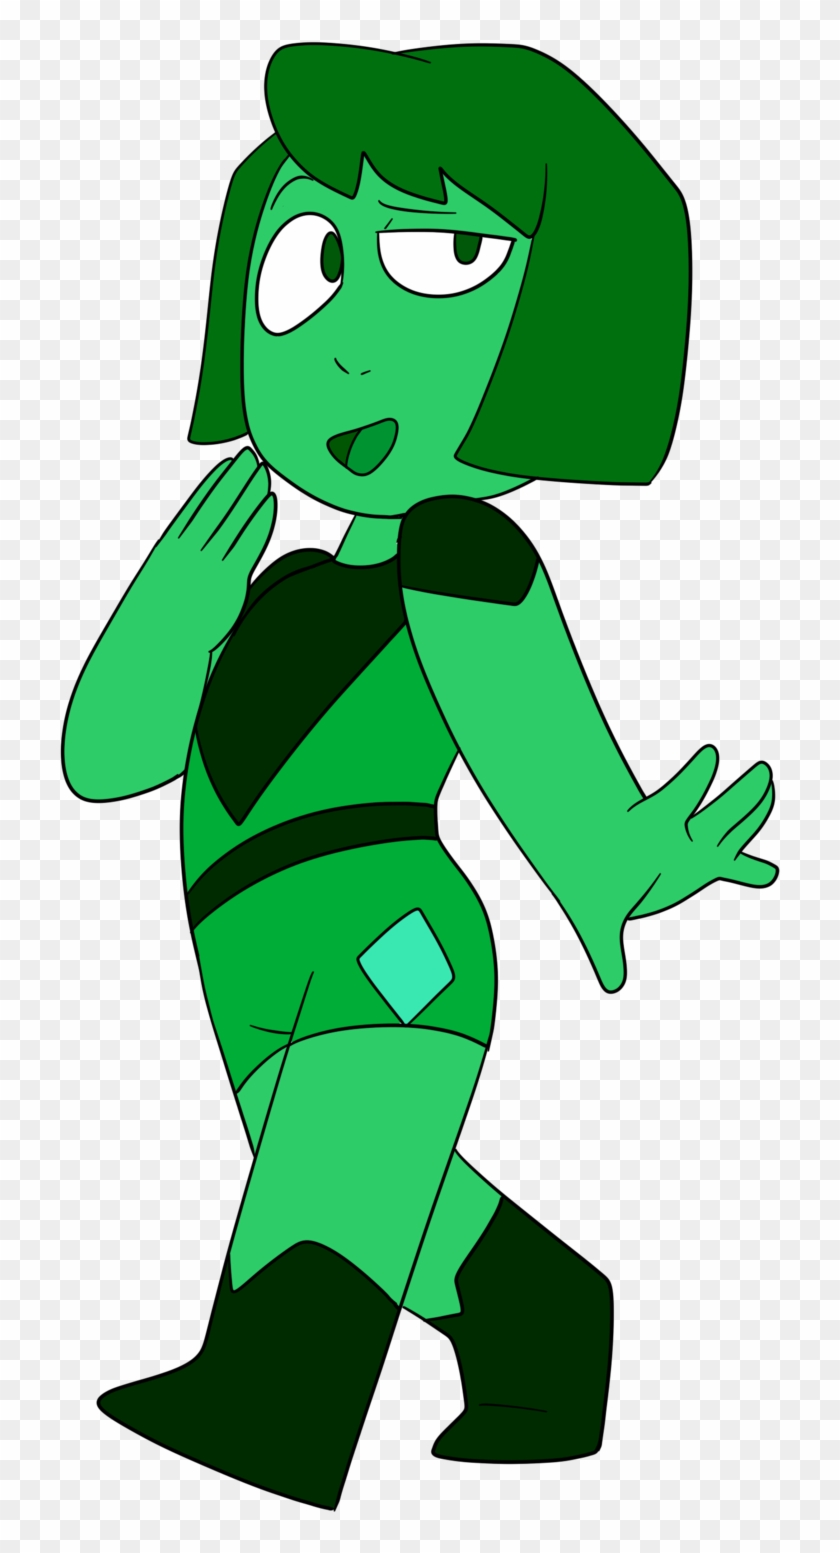 Emerald Gems Tend To Be Trouble Makers, And As A Team - Emerald Gems Tend To Be Trouble Makers, And As A Team #1546044